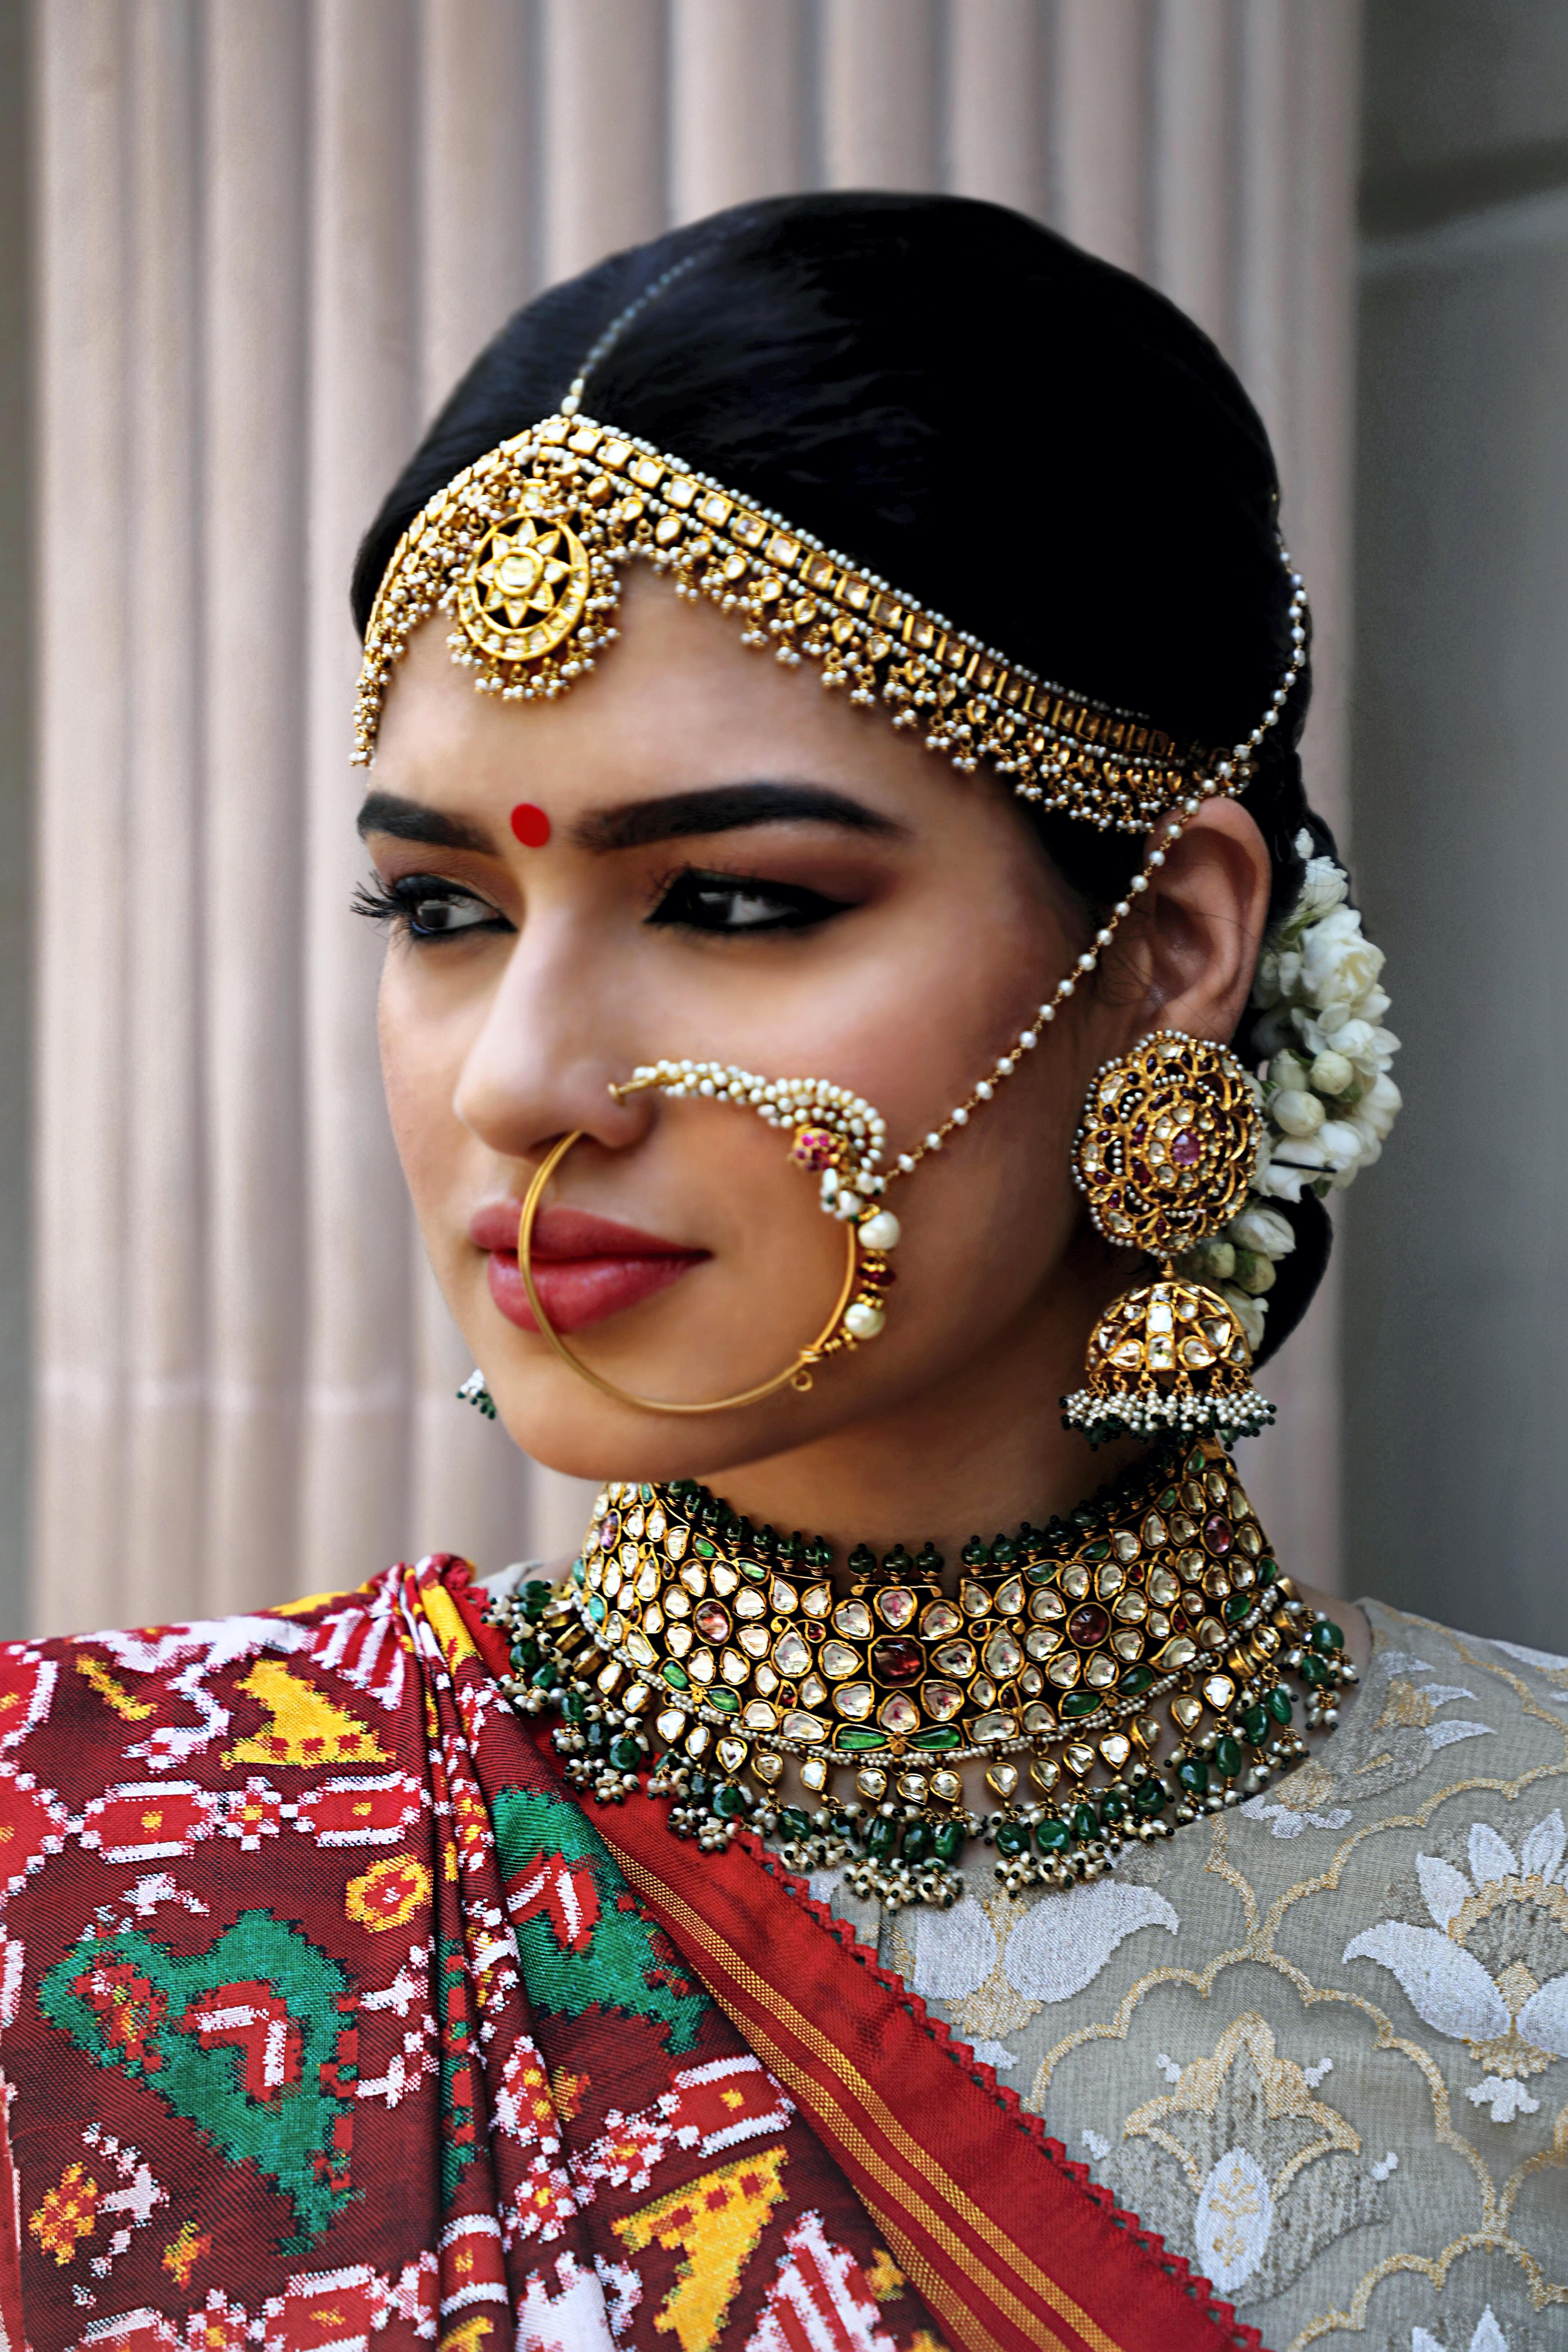 Why do Indian women wear nose studs? - Quora